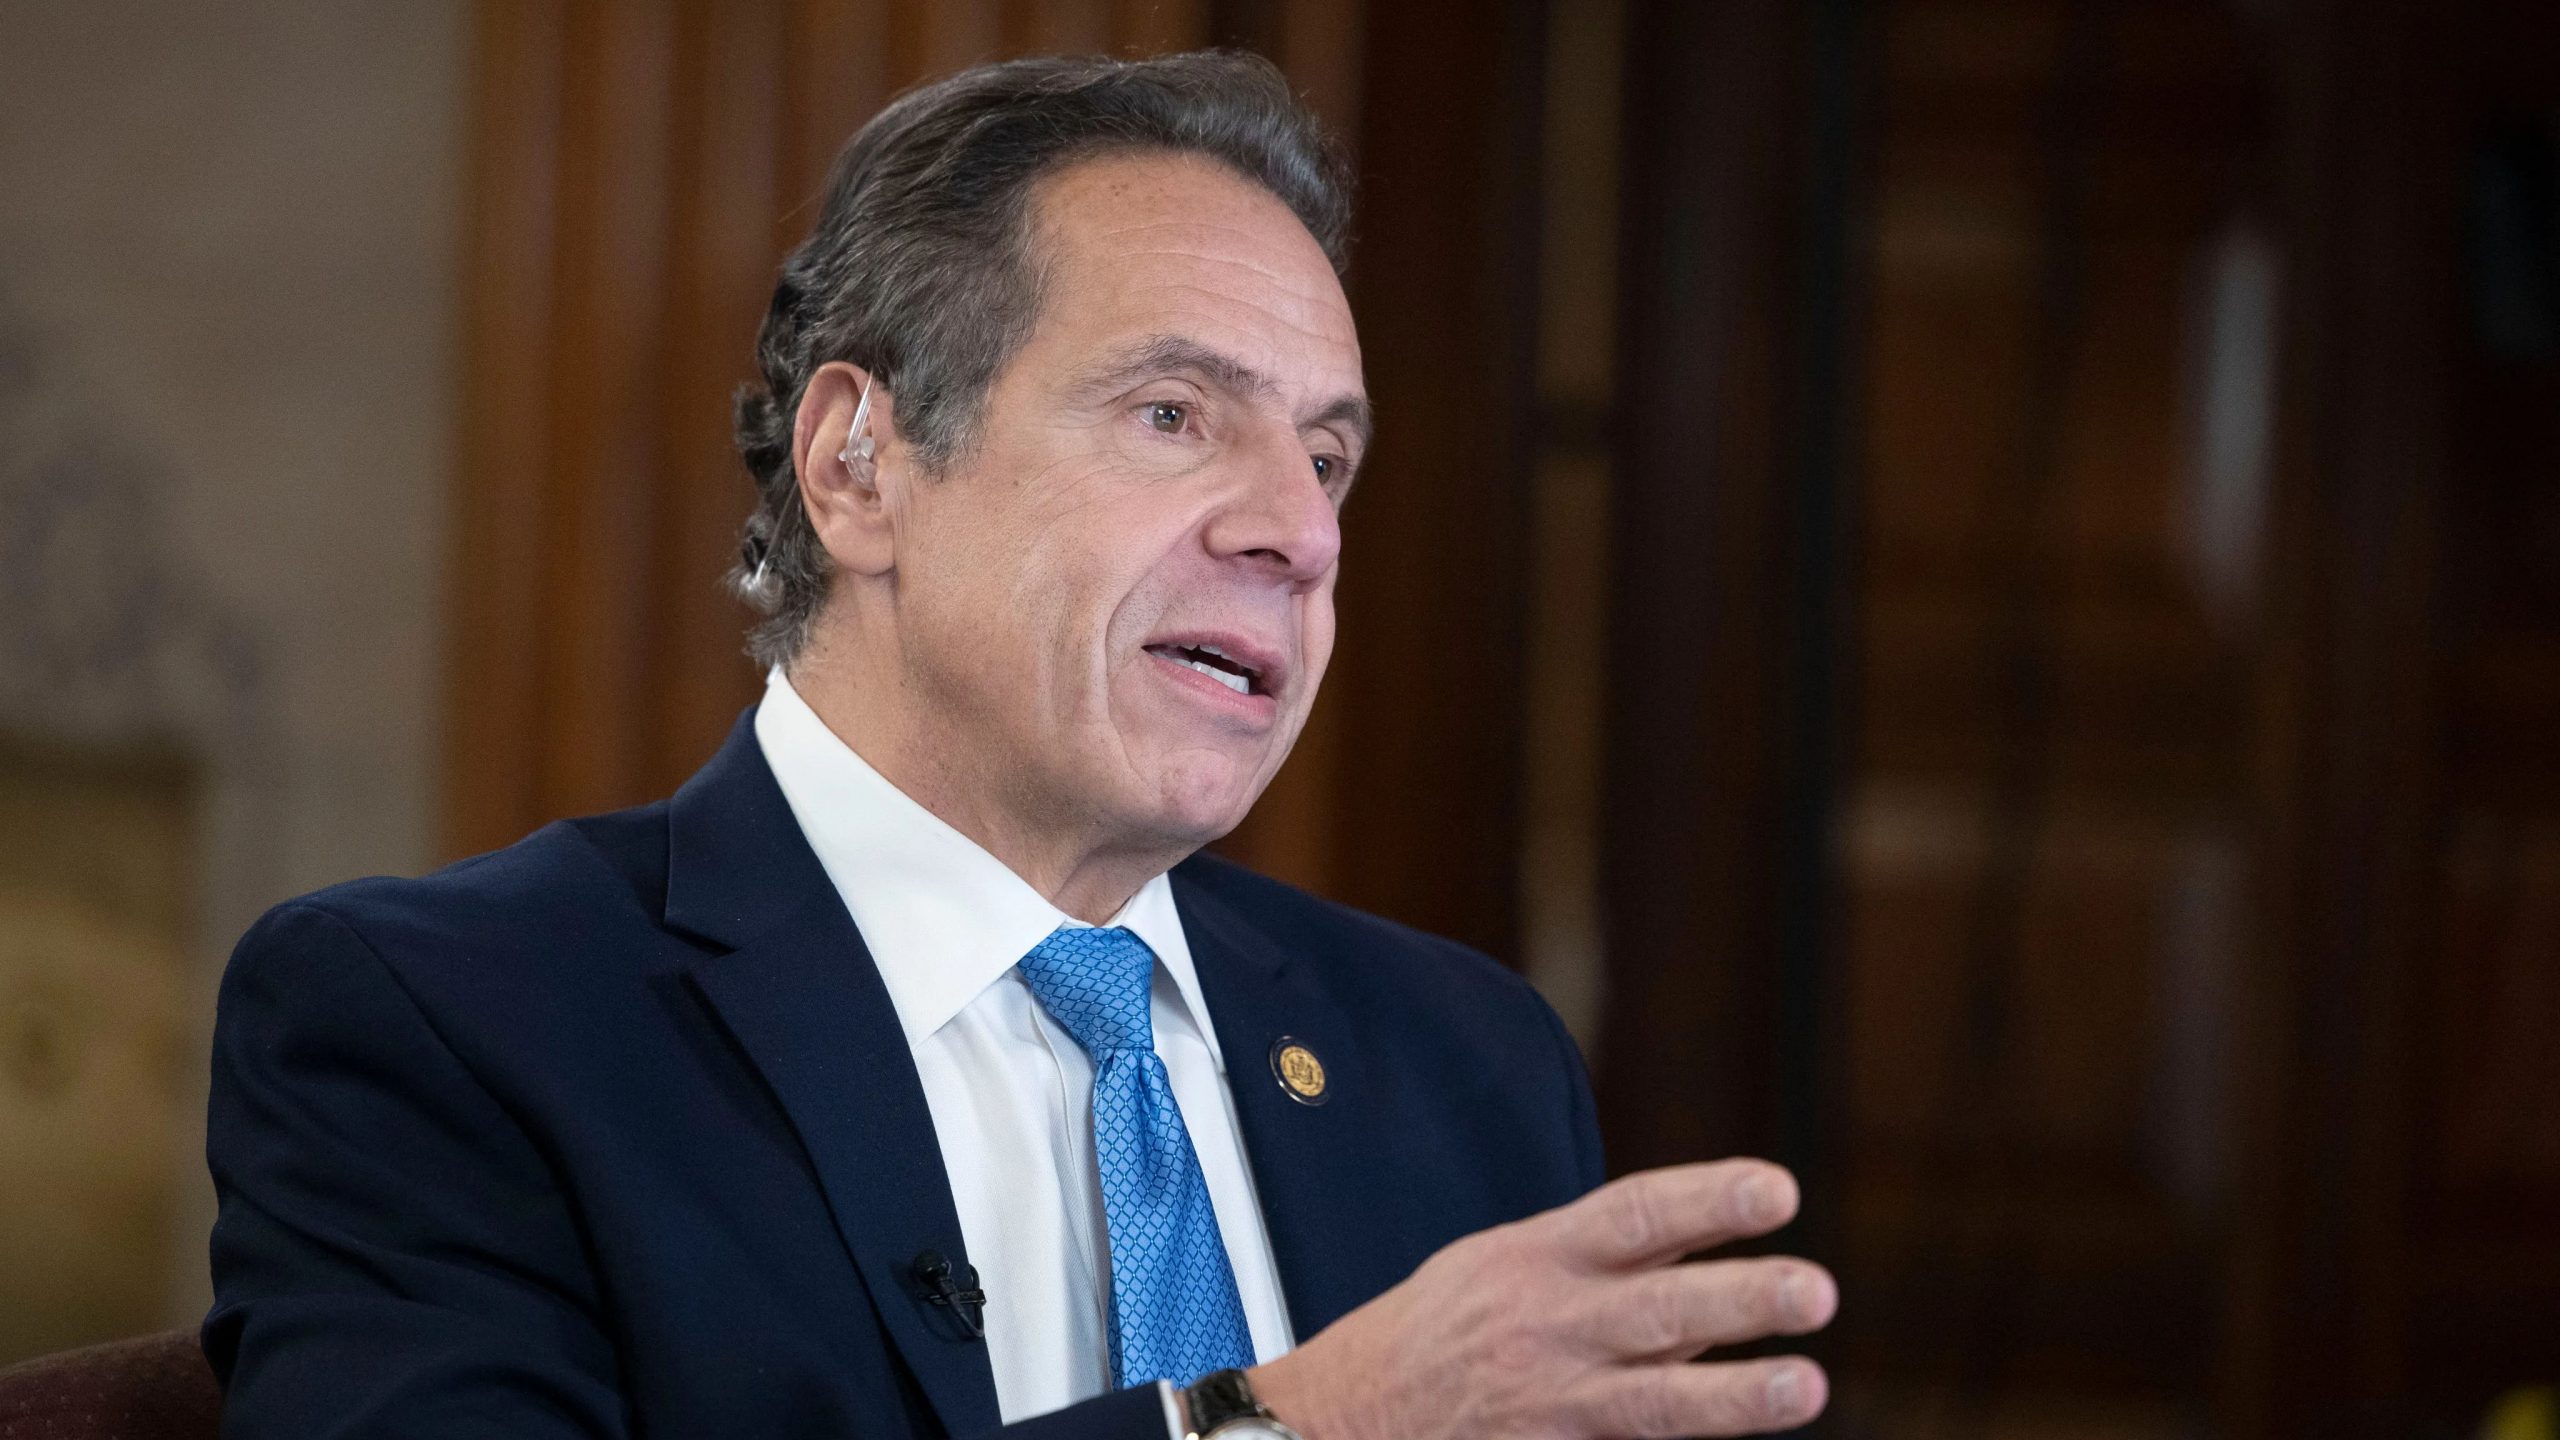 Andrew Cuomo probe: Key allegations from the Attorney General’s report